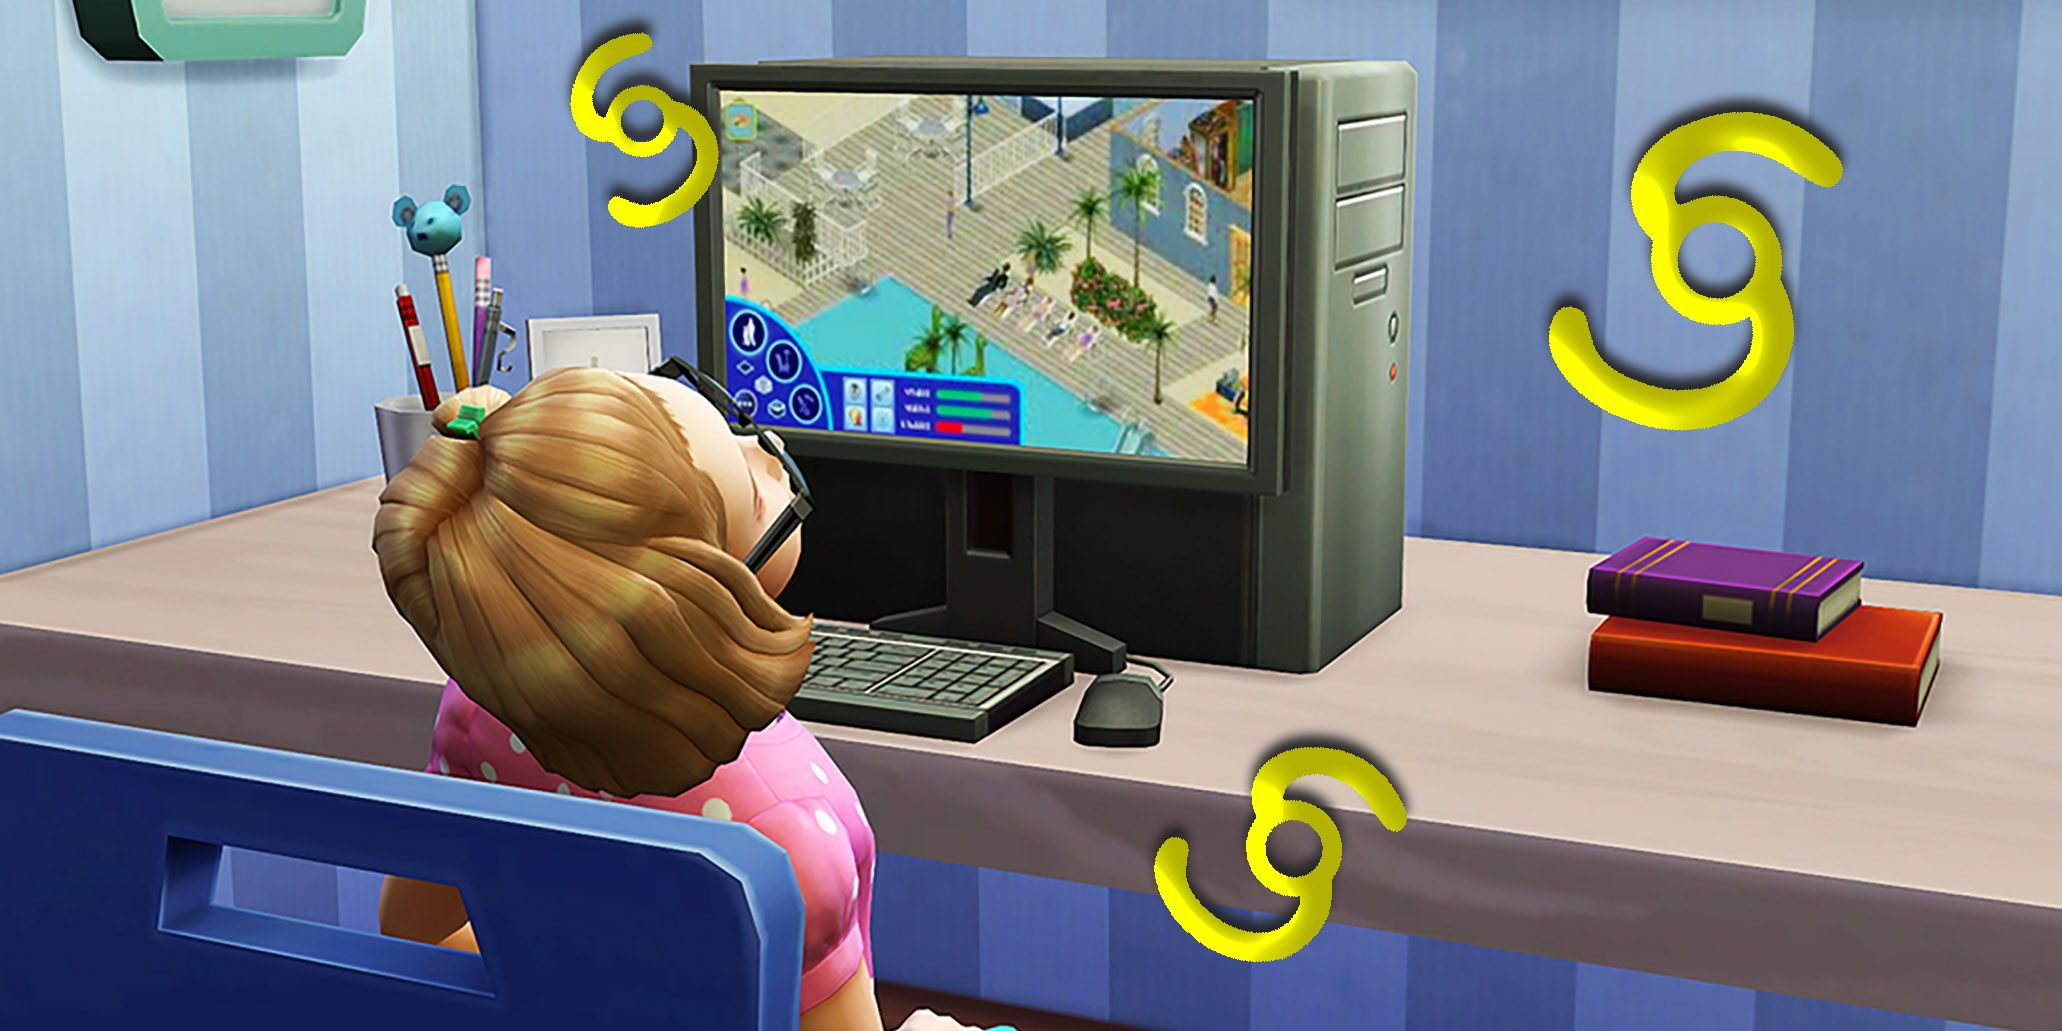 The Official Mod Hub for The Sims 4